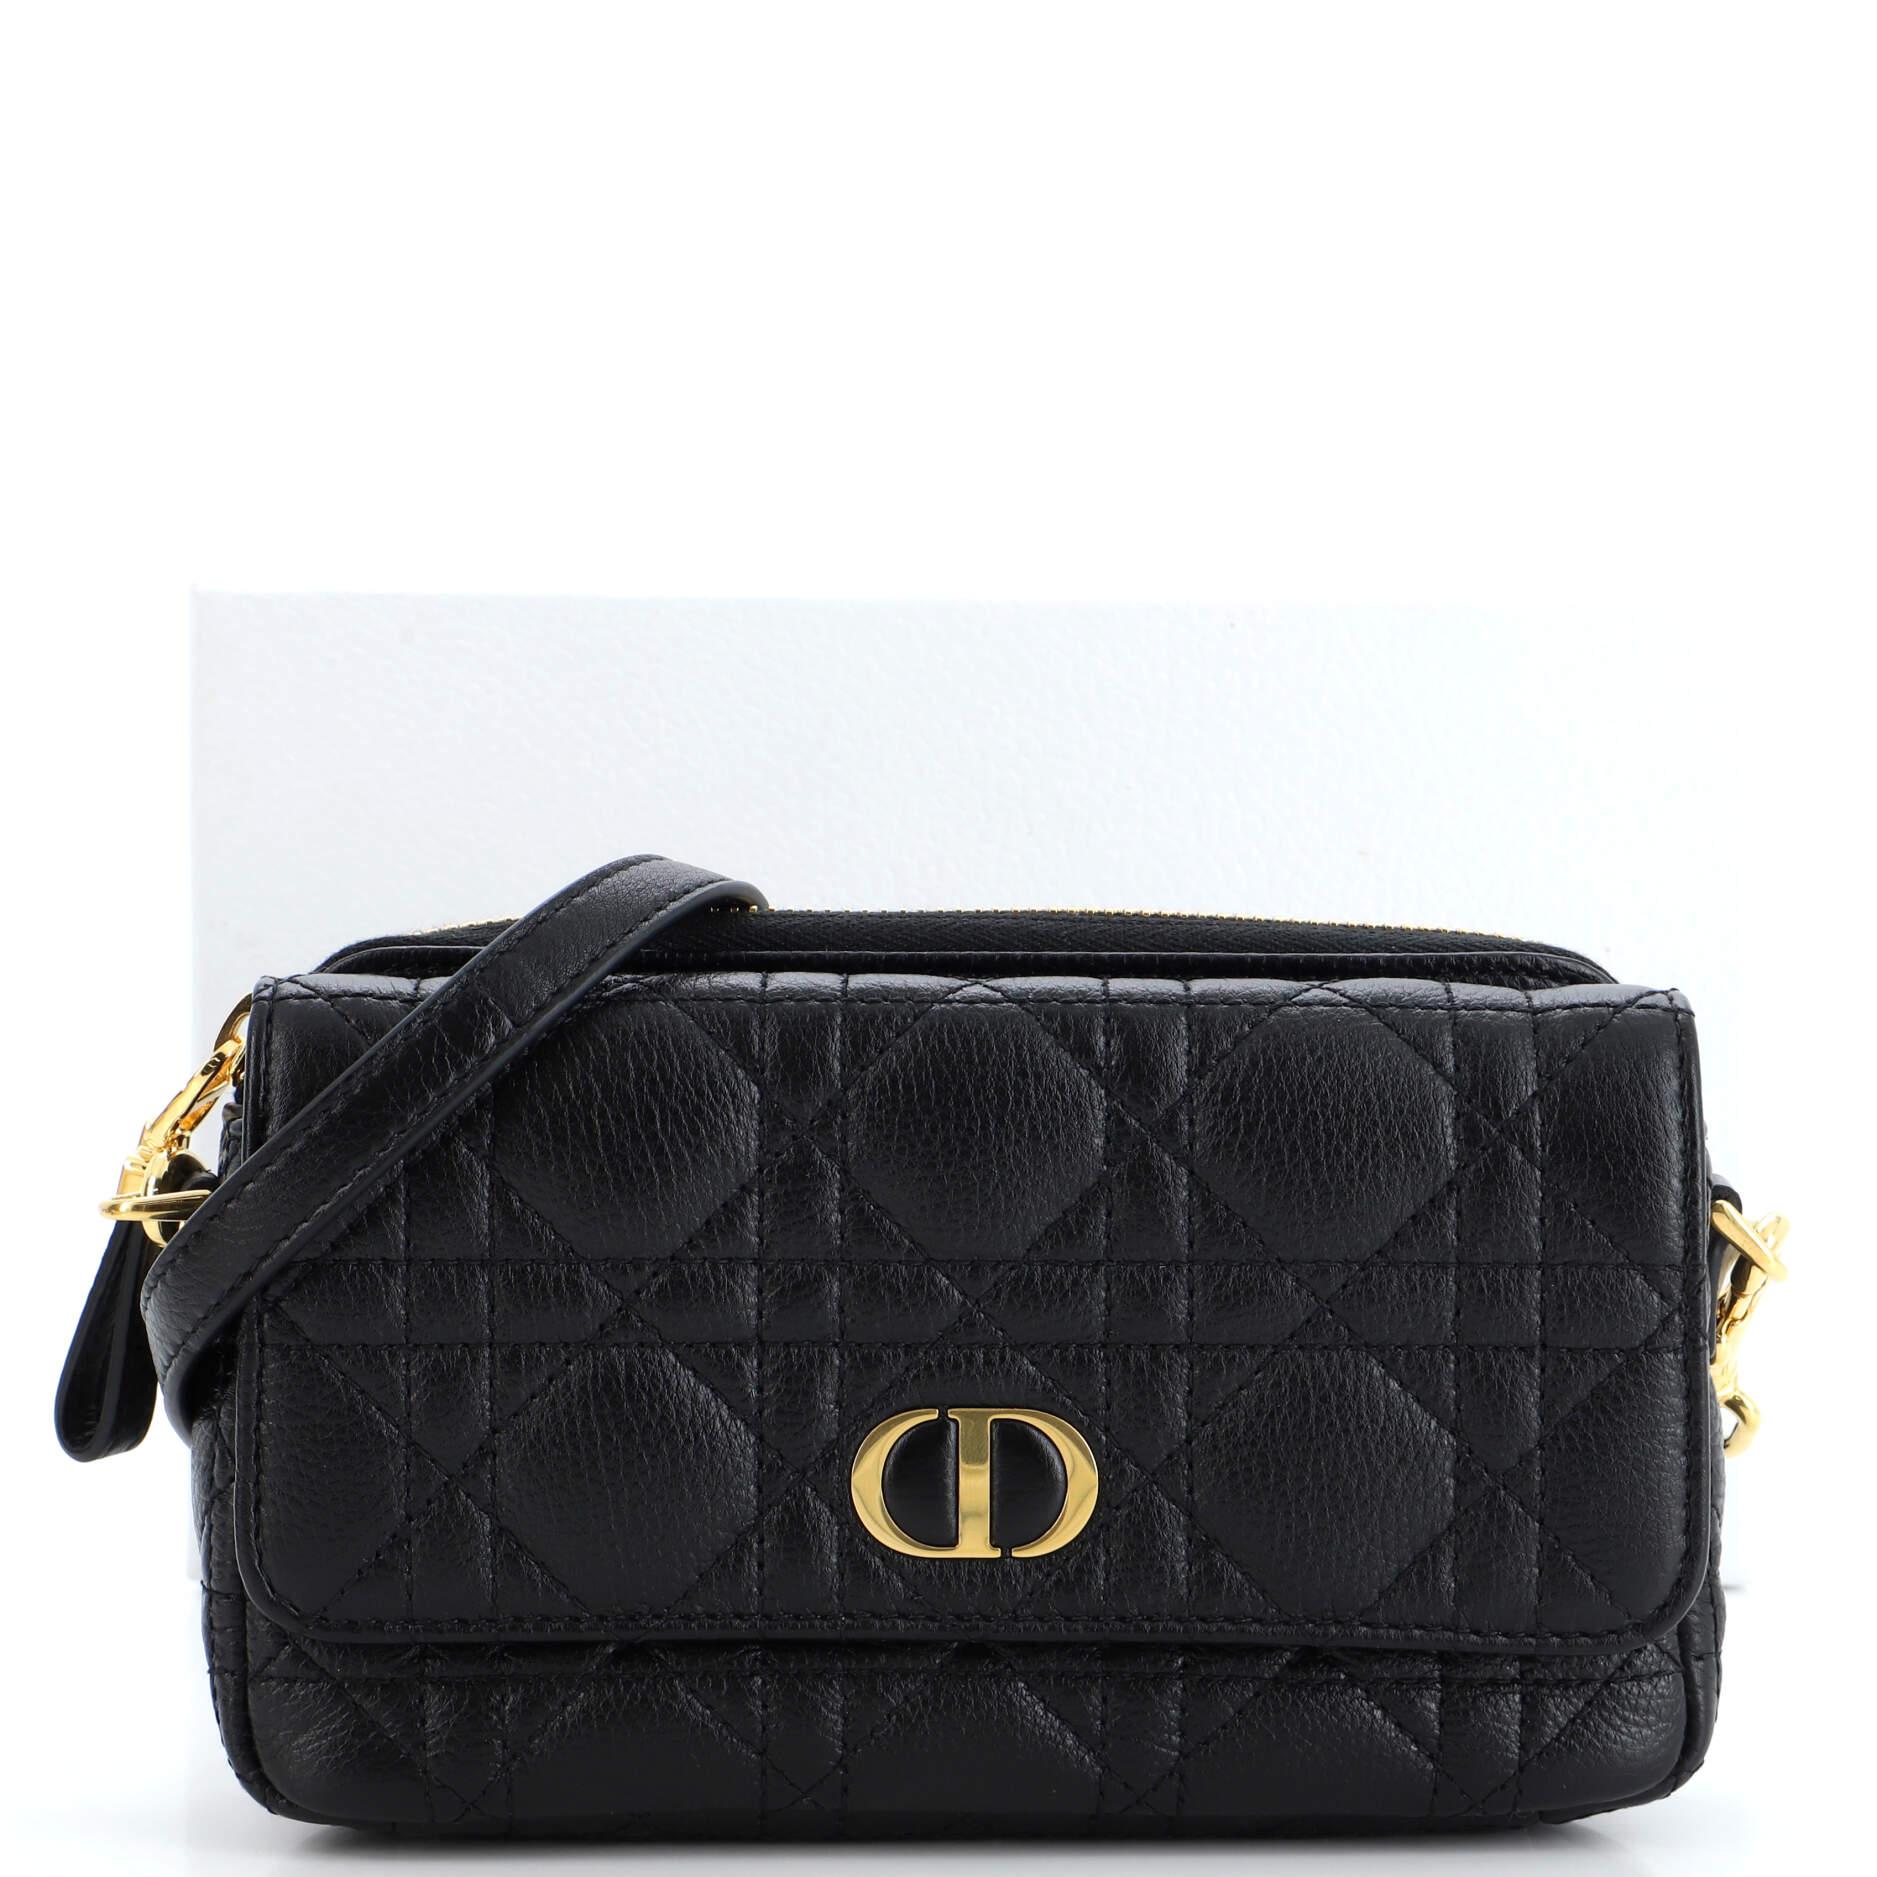 Dior Caro Black Pouch - For Sale on 1stDibs